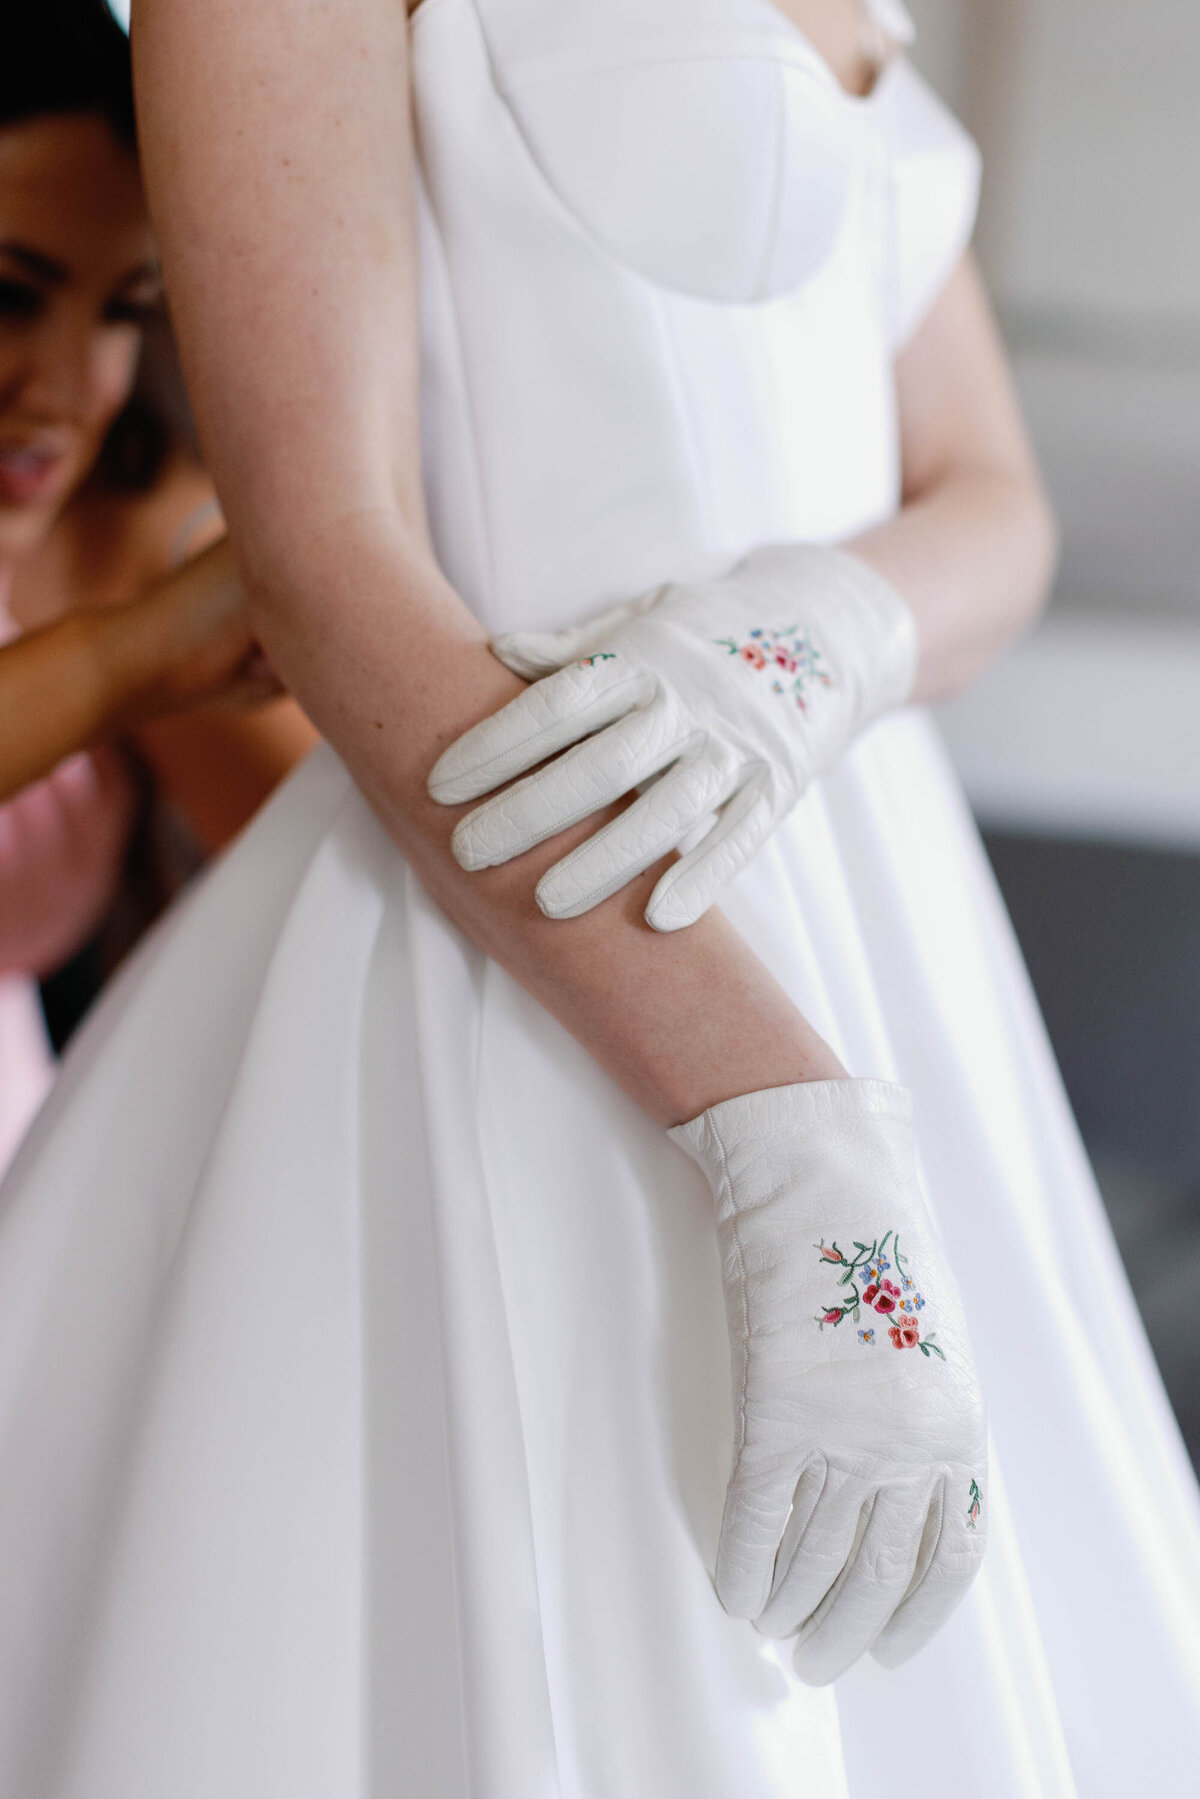 brides-gloves-at-the-grand-lady-wedding-in-texas